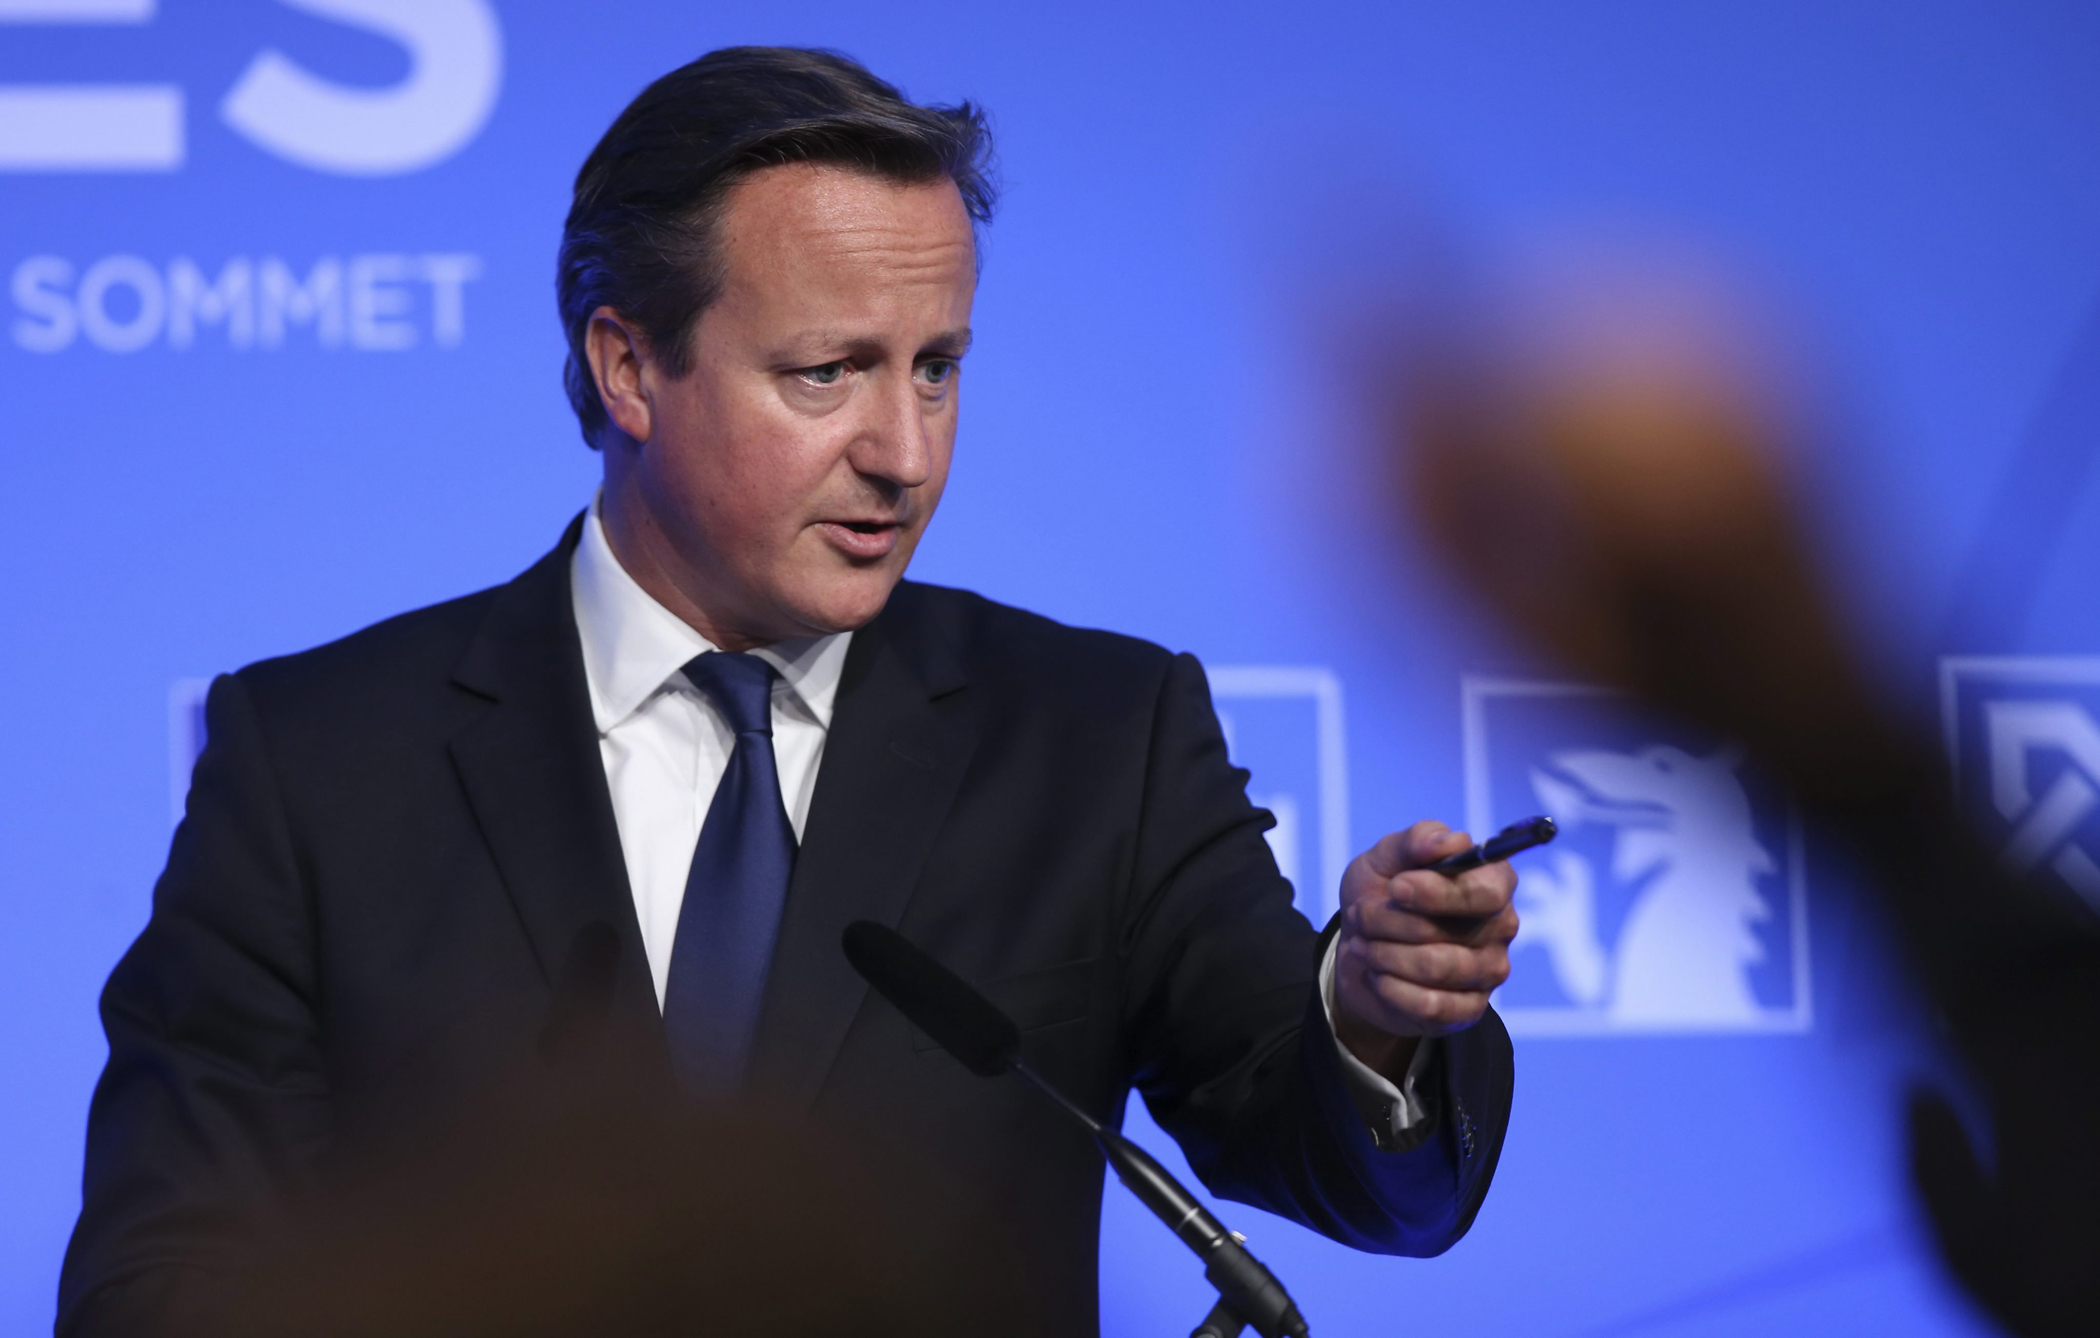 Prime Minister David Cameron speaks during a press conference as part of the NATO Summit 2014 at the Celtic Manor Resort in Newport, Wales, Sept. 5 2014.